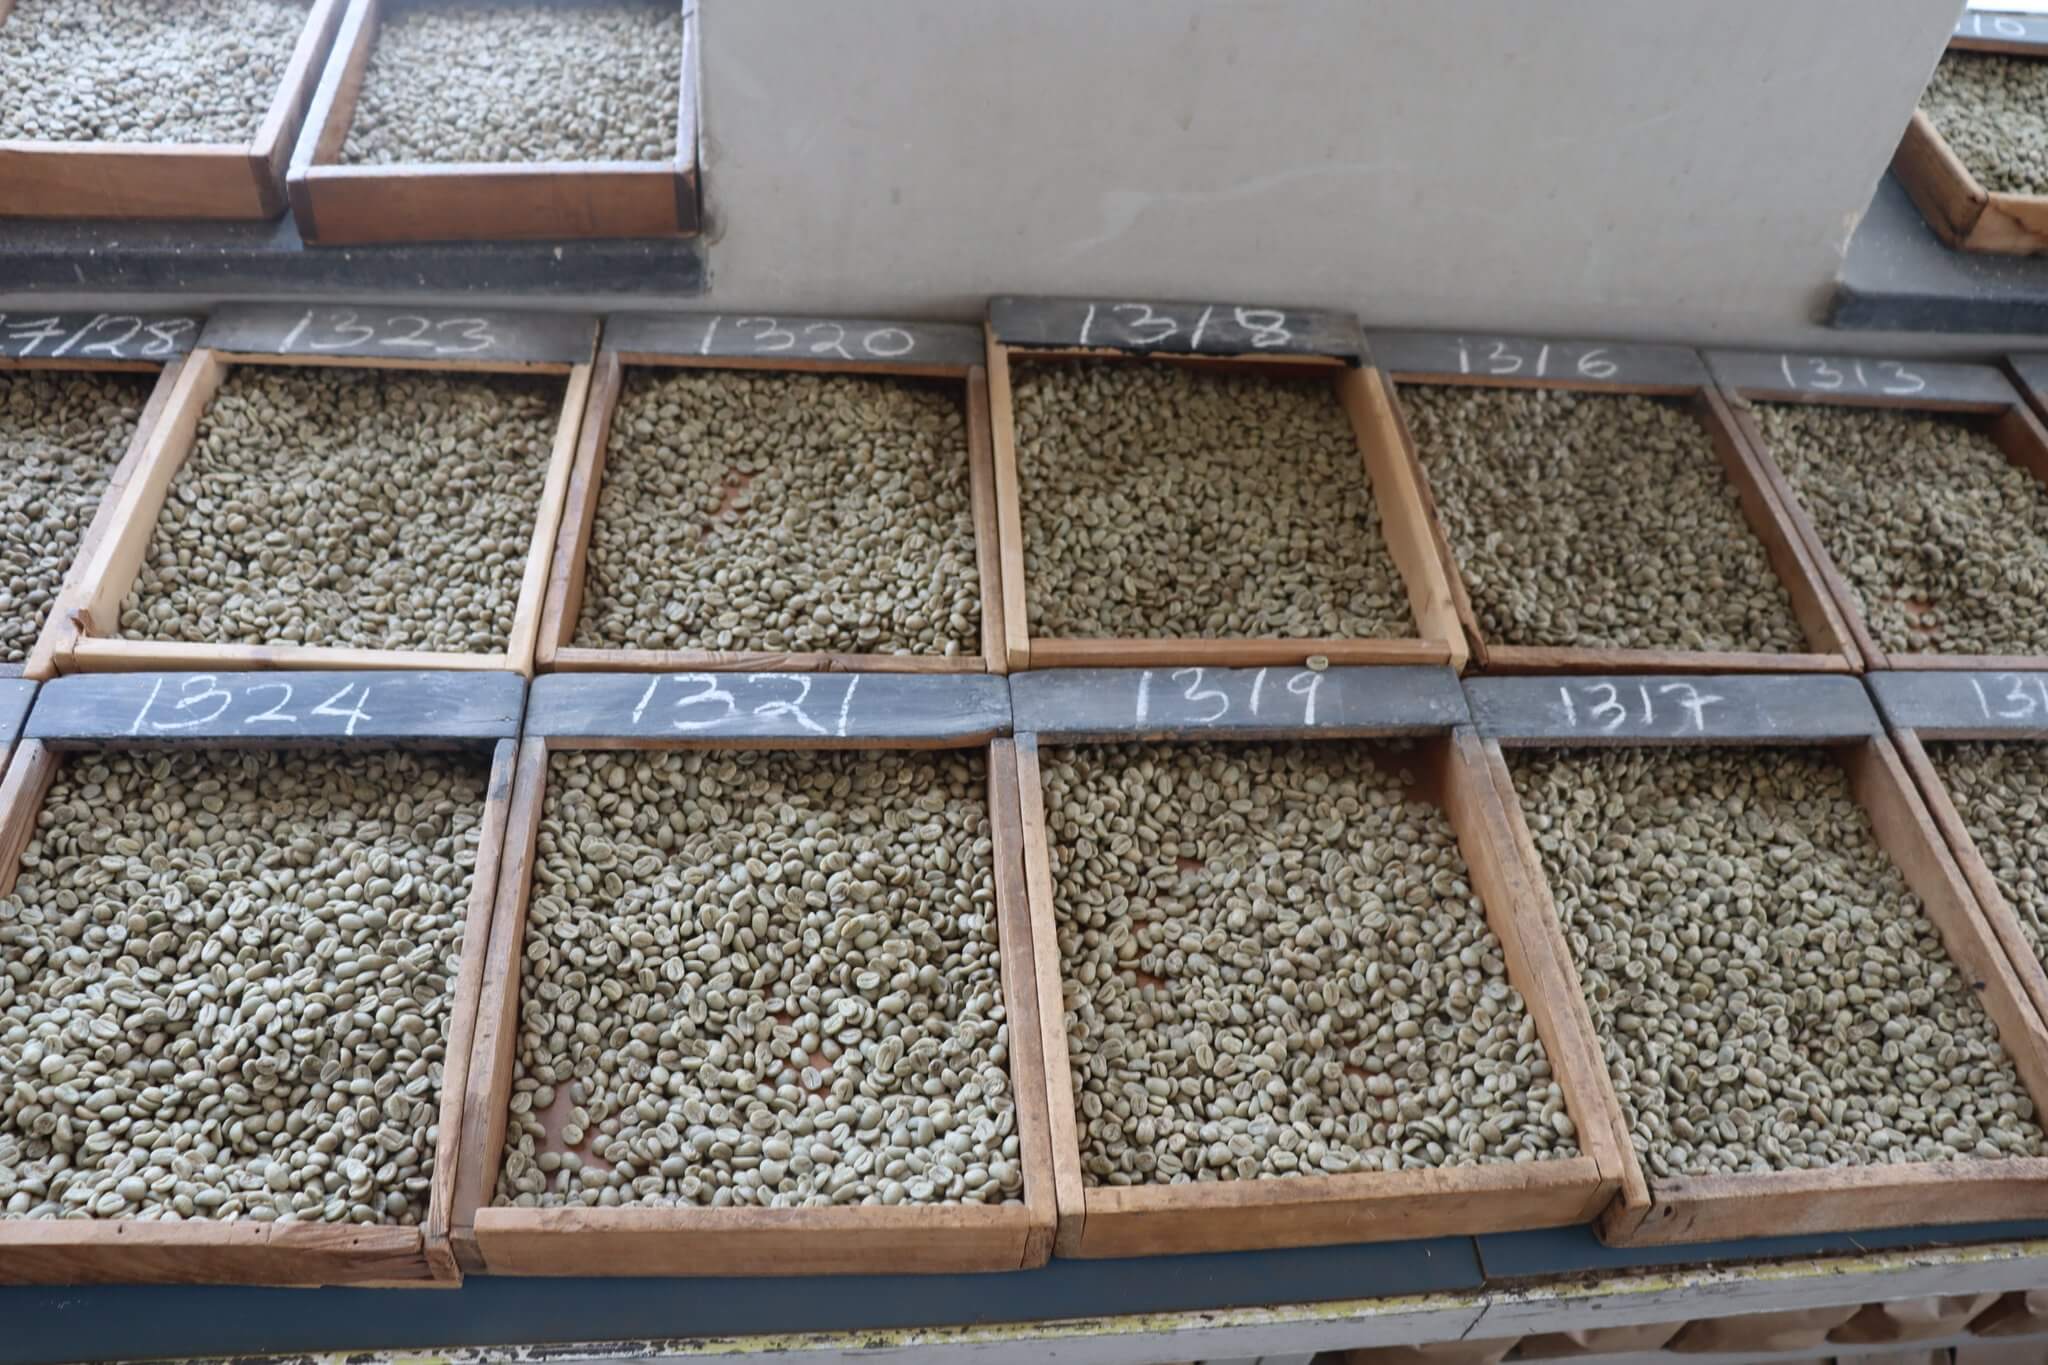 Kenyan Coffee Surge by 17pc on High Demand and Global Shortages